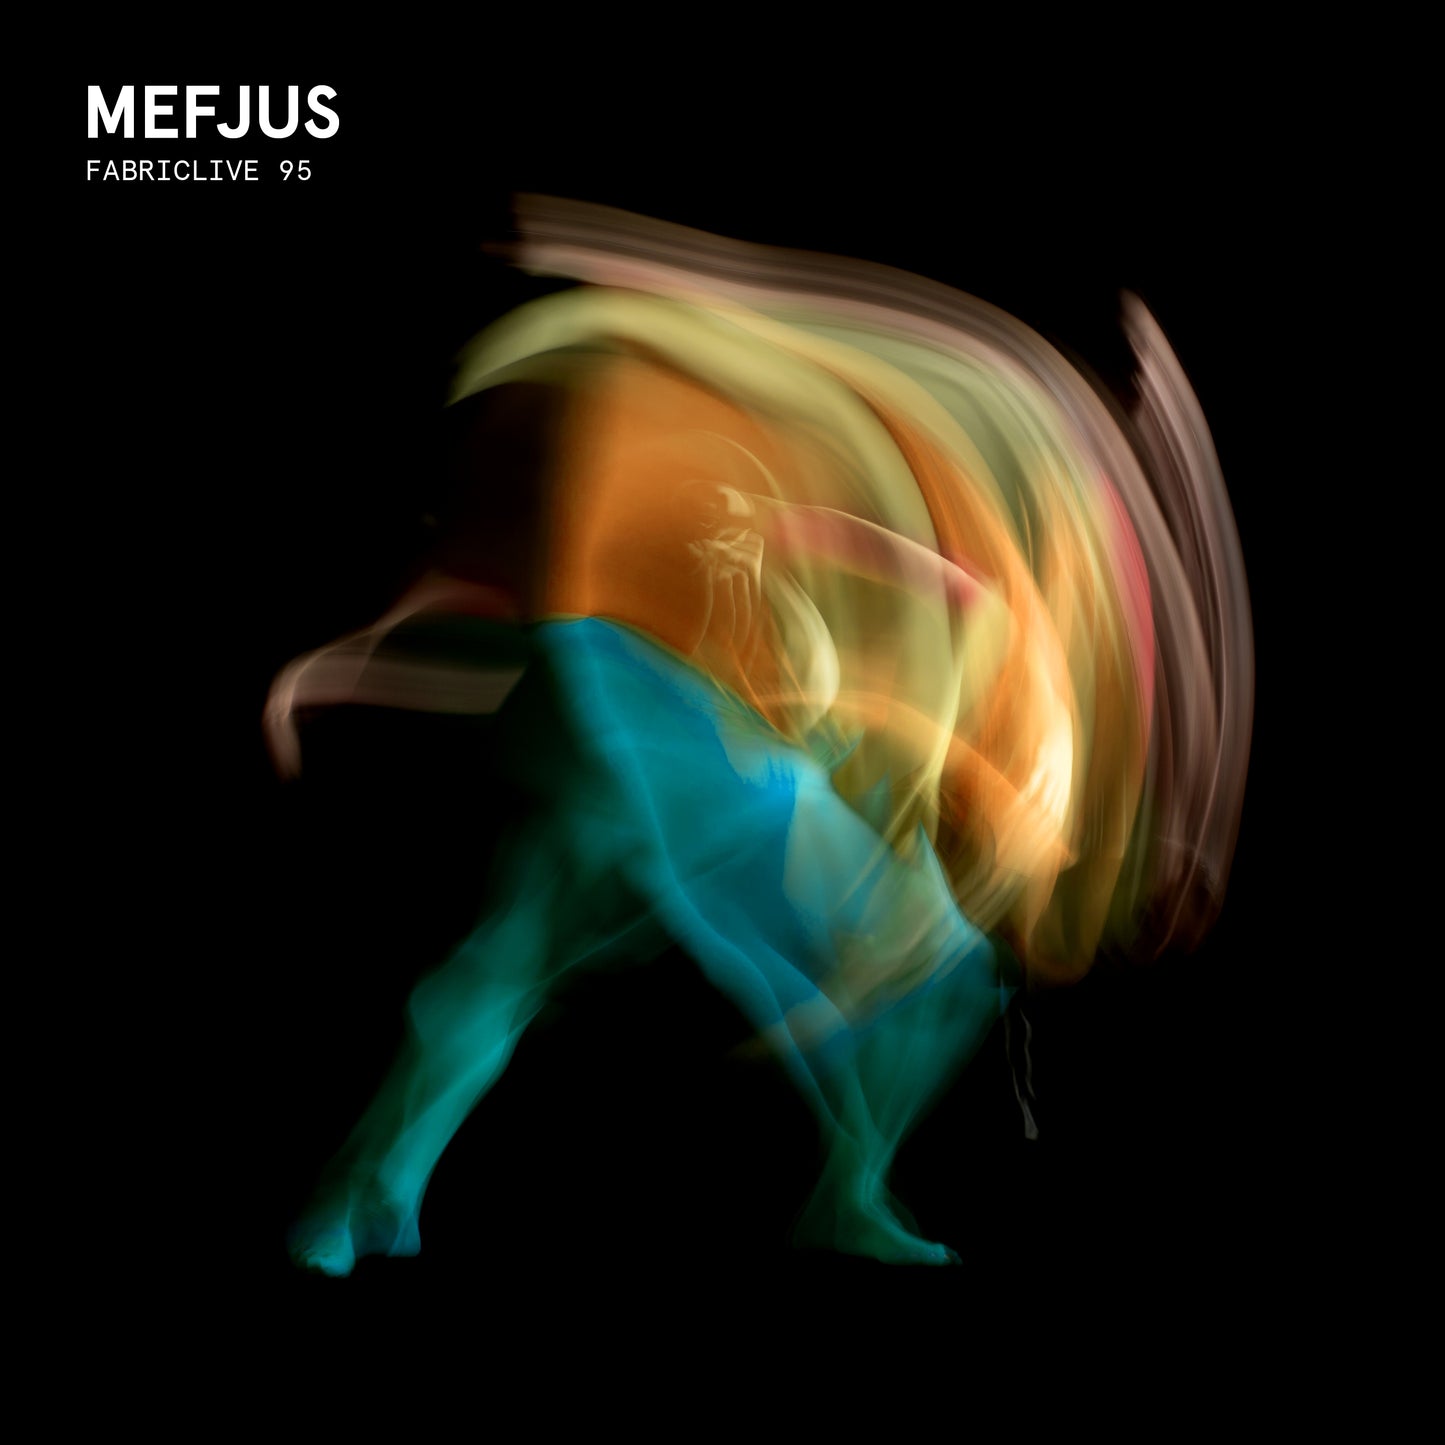 Mefjus - FABRICLIVE 95